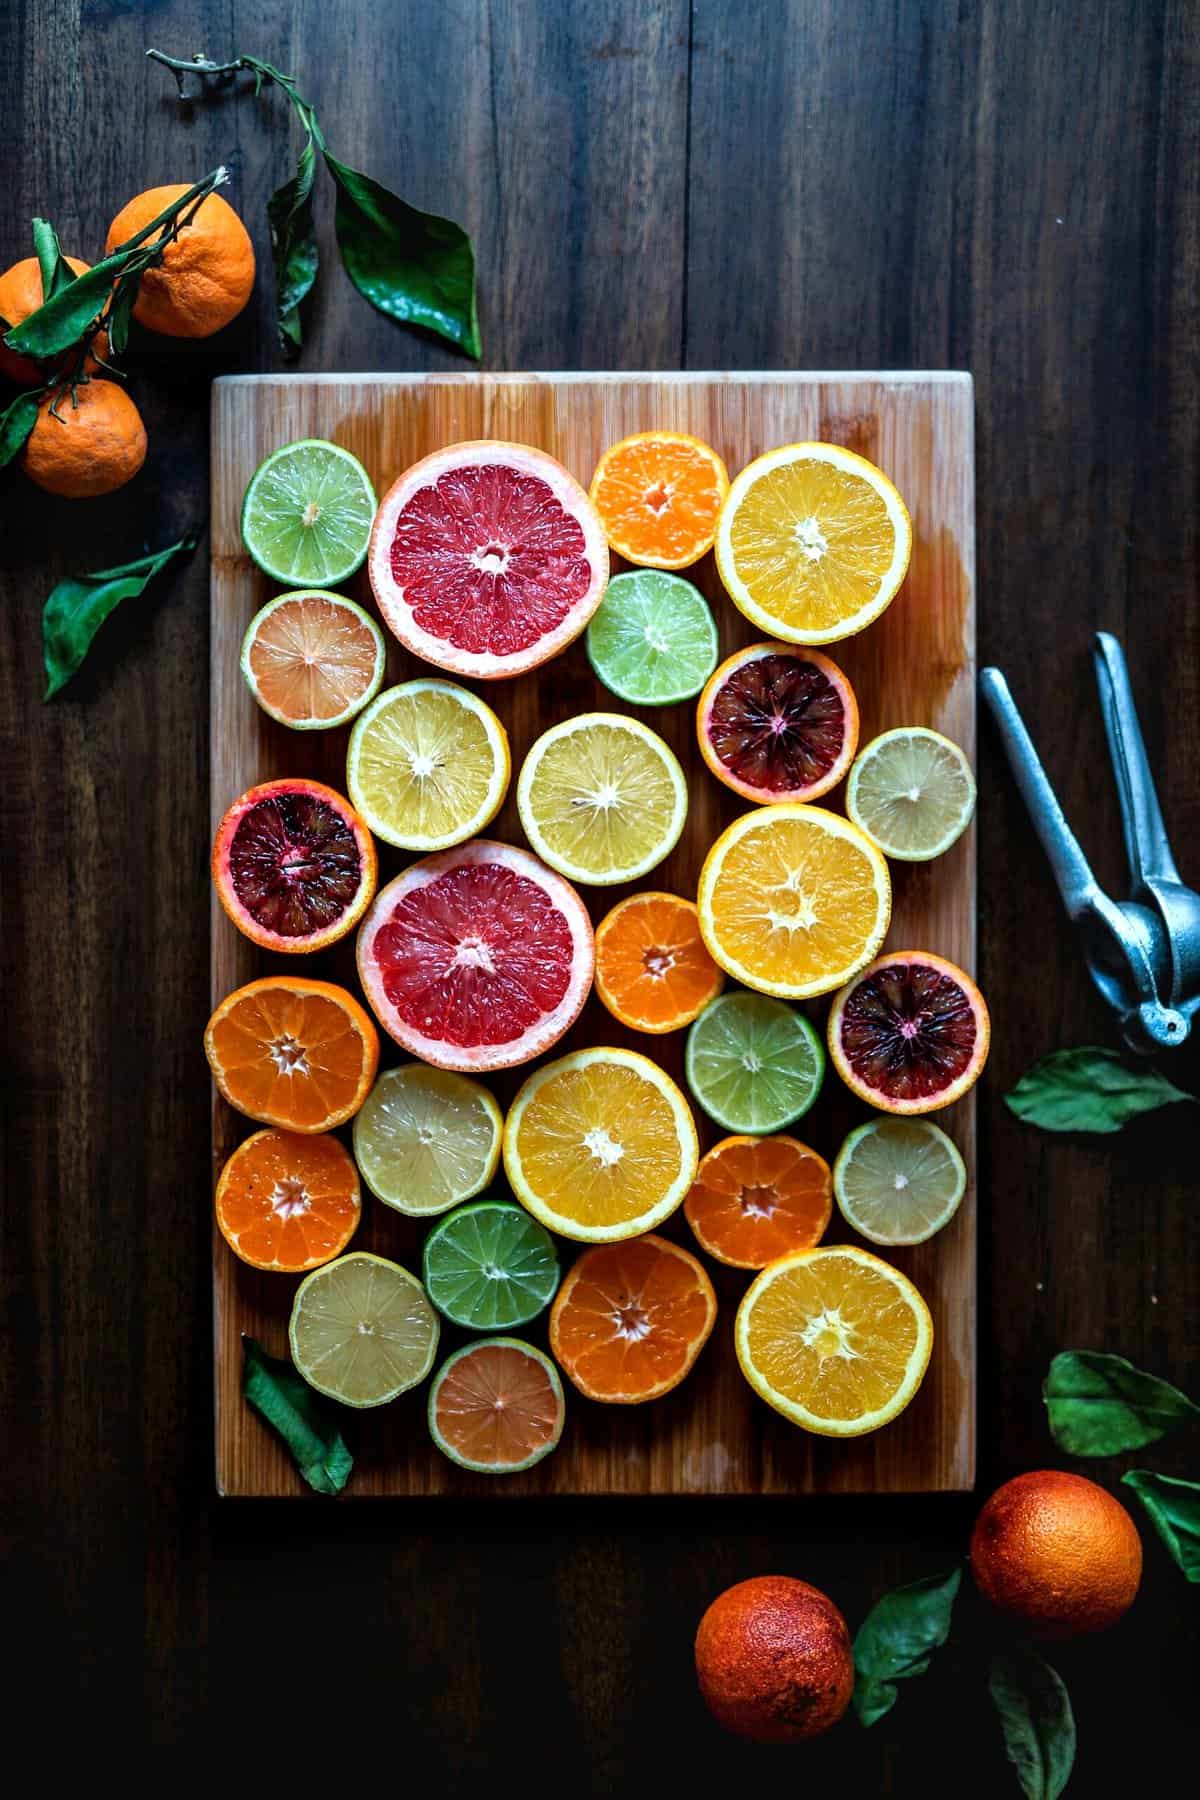 Slices of colorful fruit on a wooden board